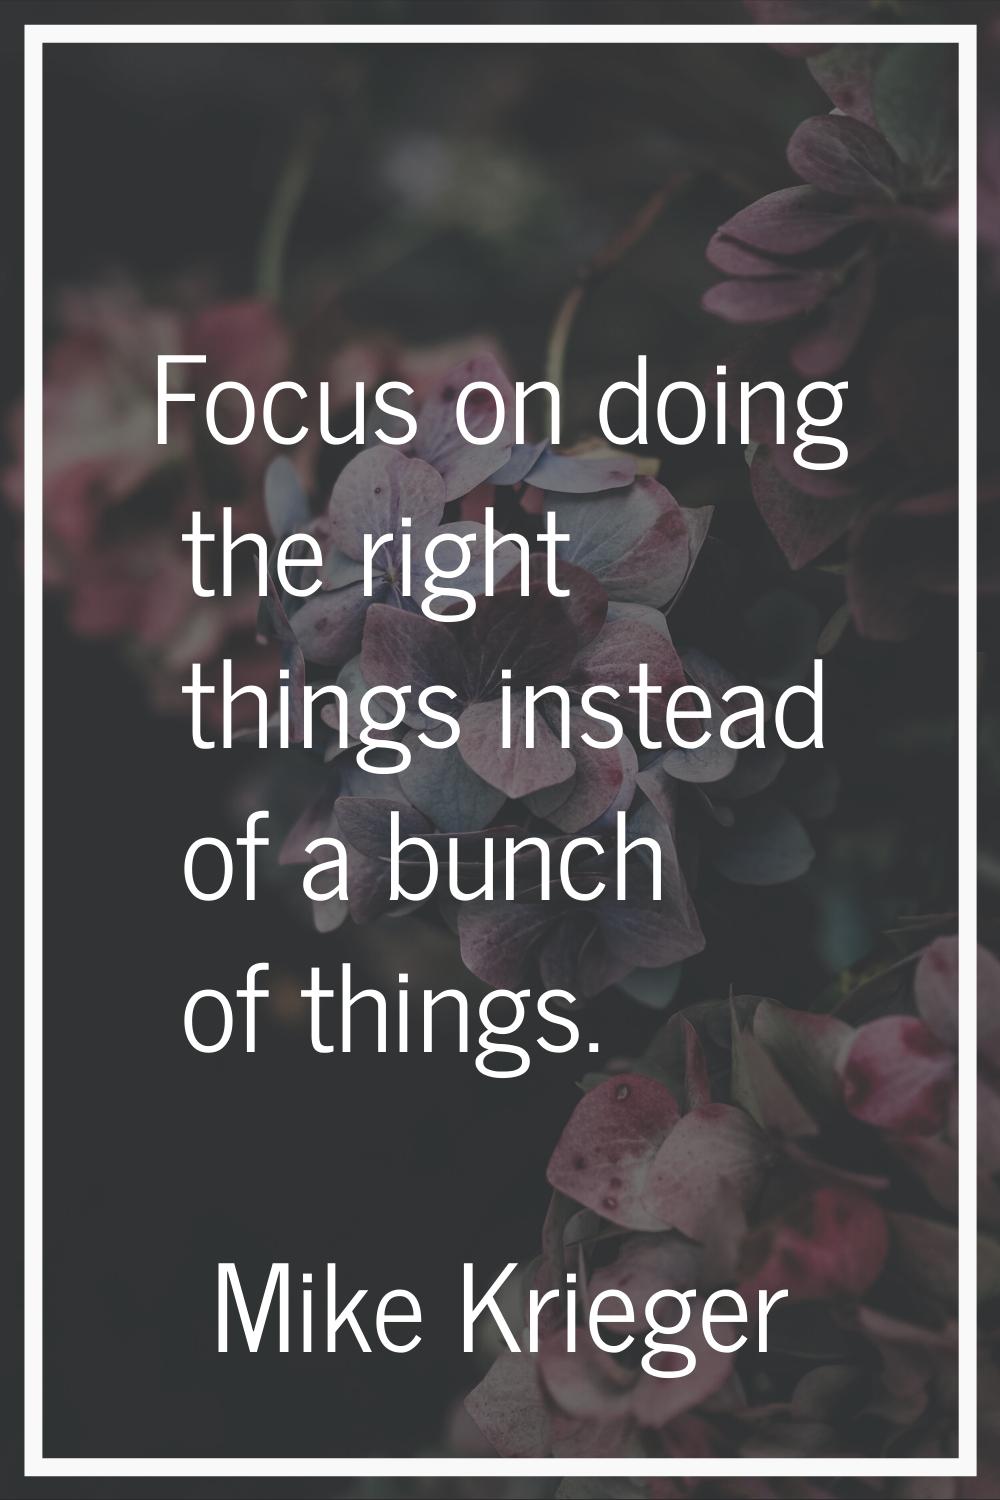 Focus on doing the right things instead of a bunch of things.